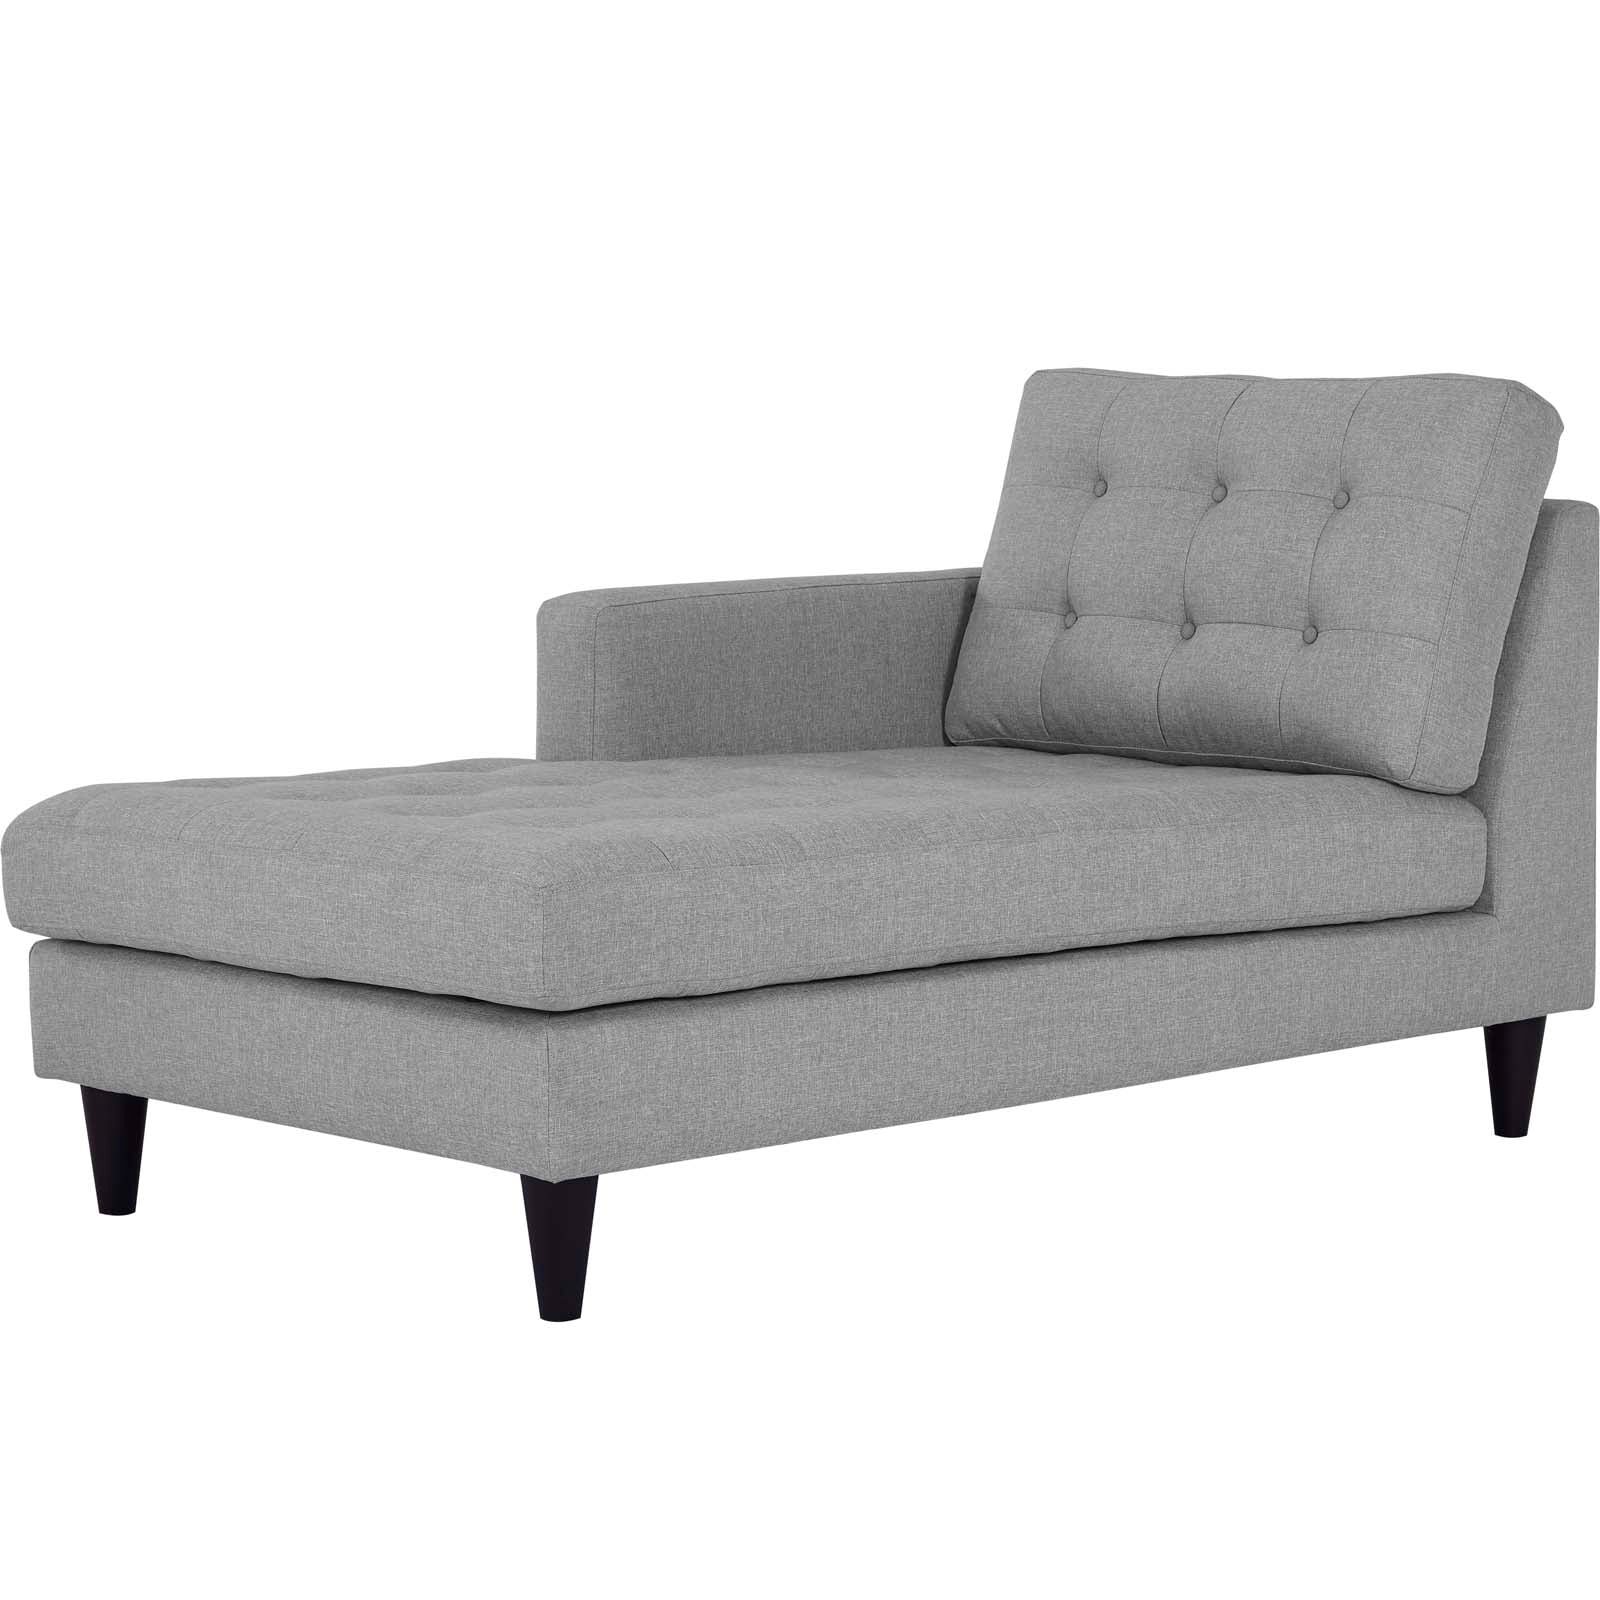 Modway Sleepers & Futons - Empress Left-Arm Upholstered Fabric Chaise Light Gray